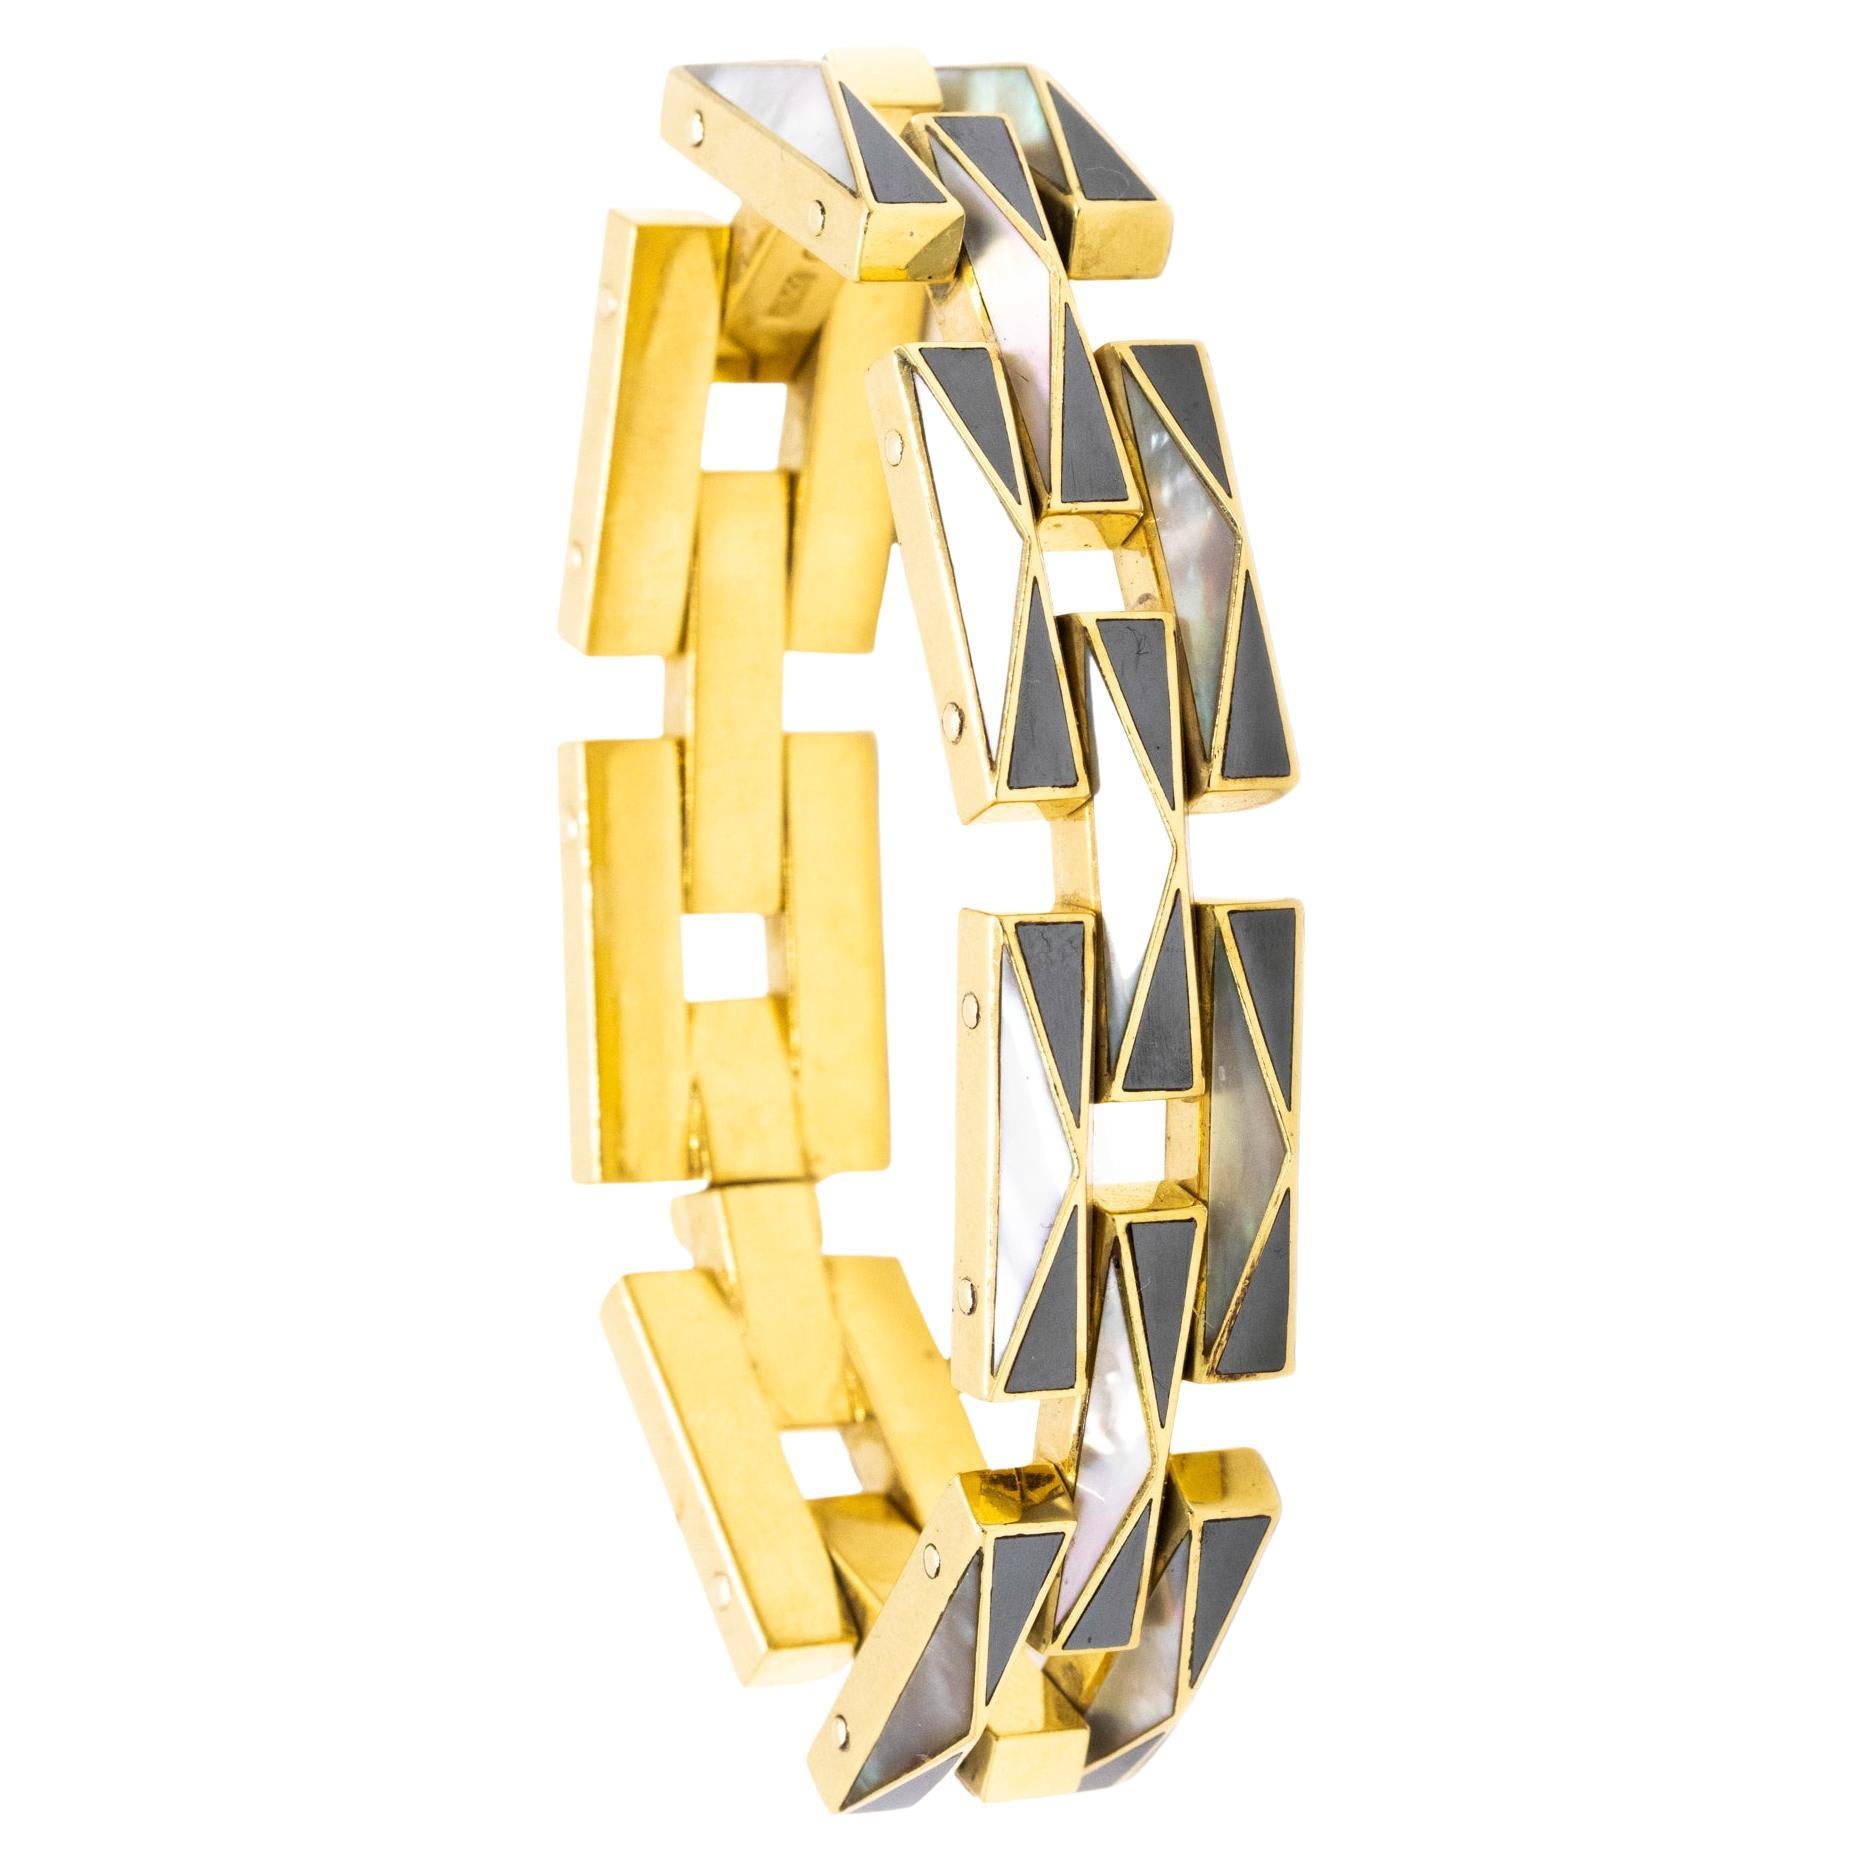 Tiffany And Co. 1982 Angela Cummings Geometric Bracelet 18Kt Gold Inlaid Carving For Sale